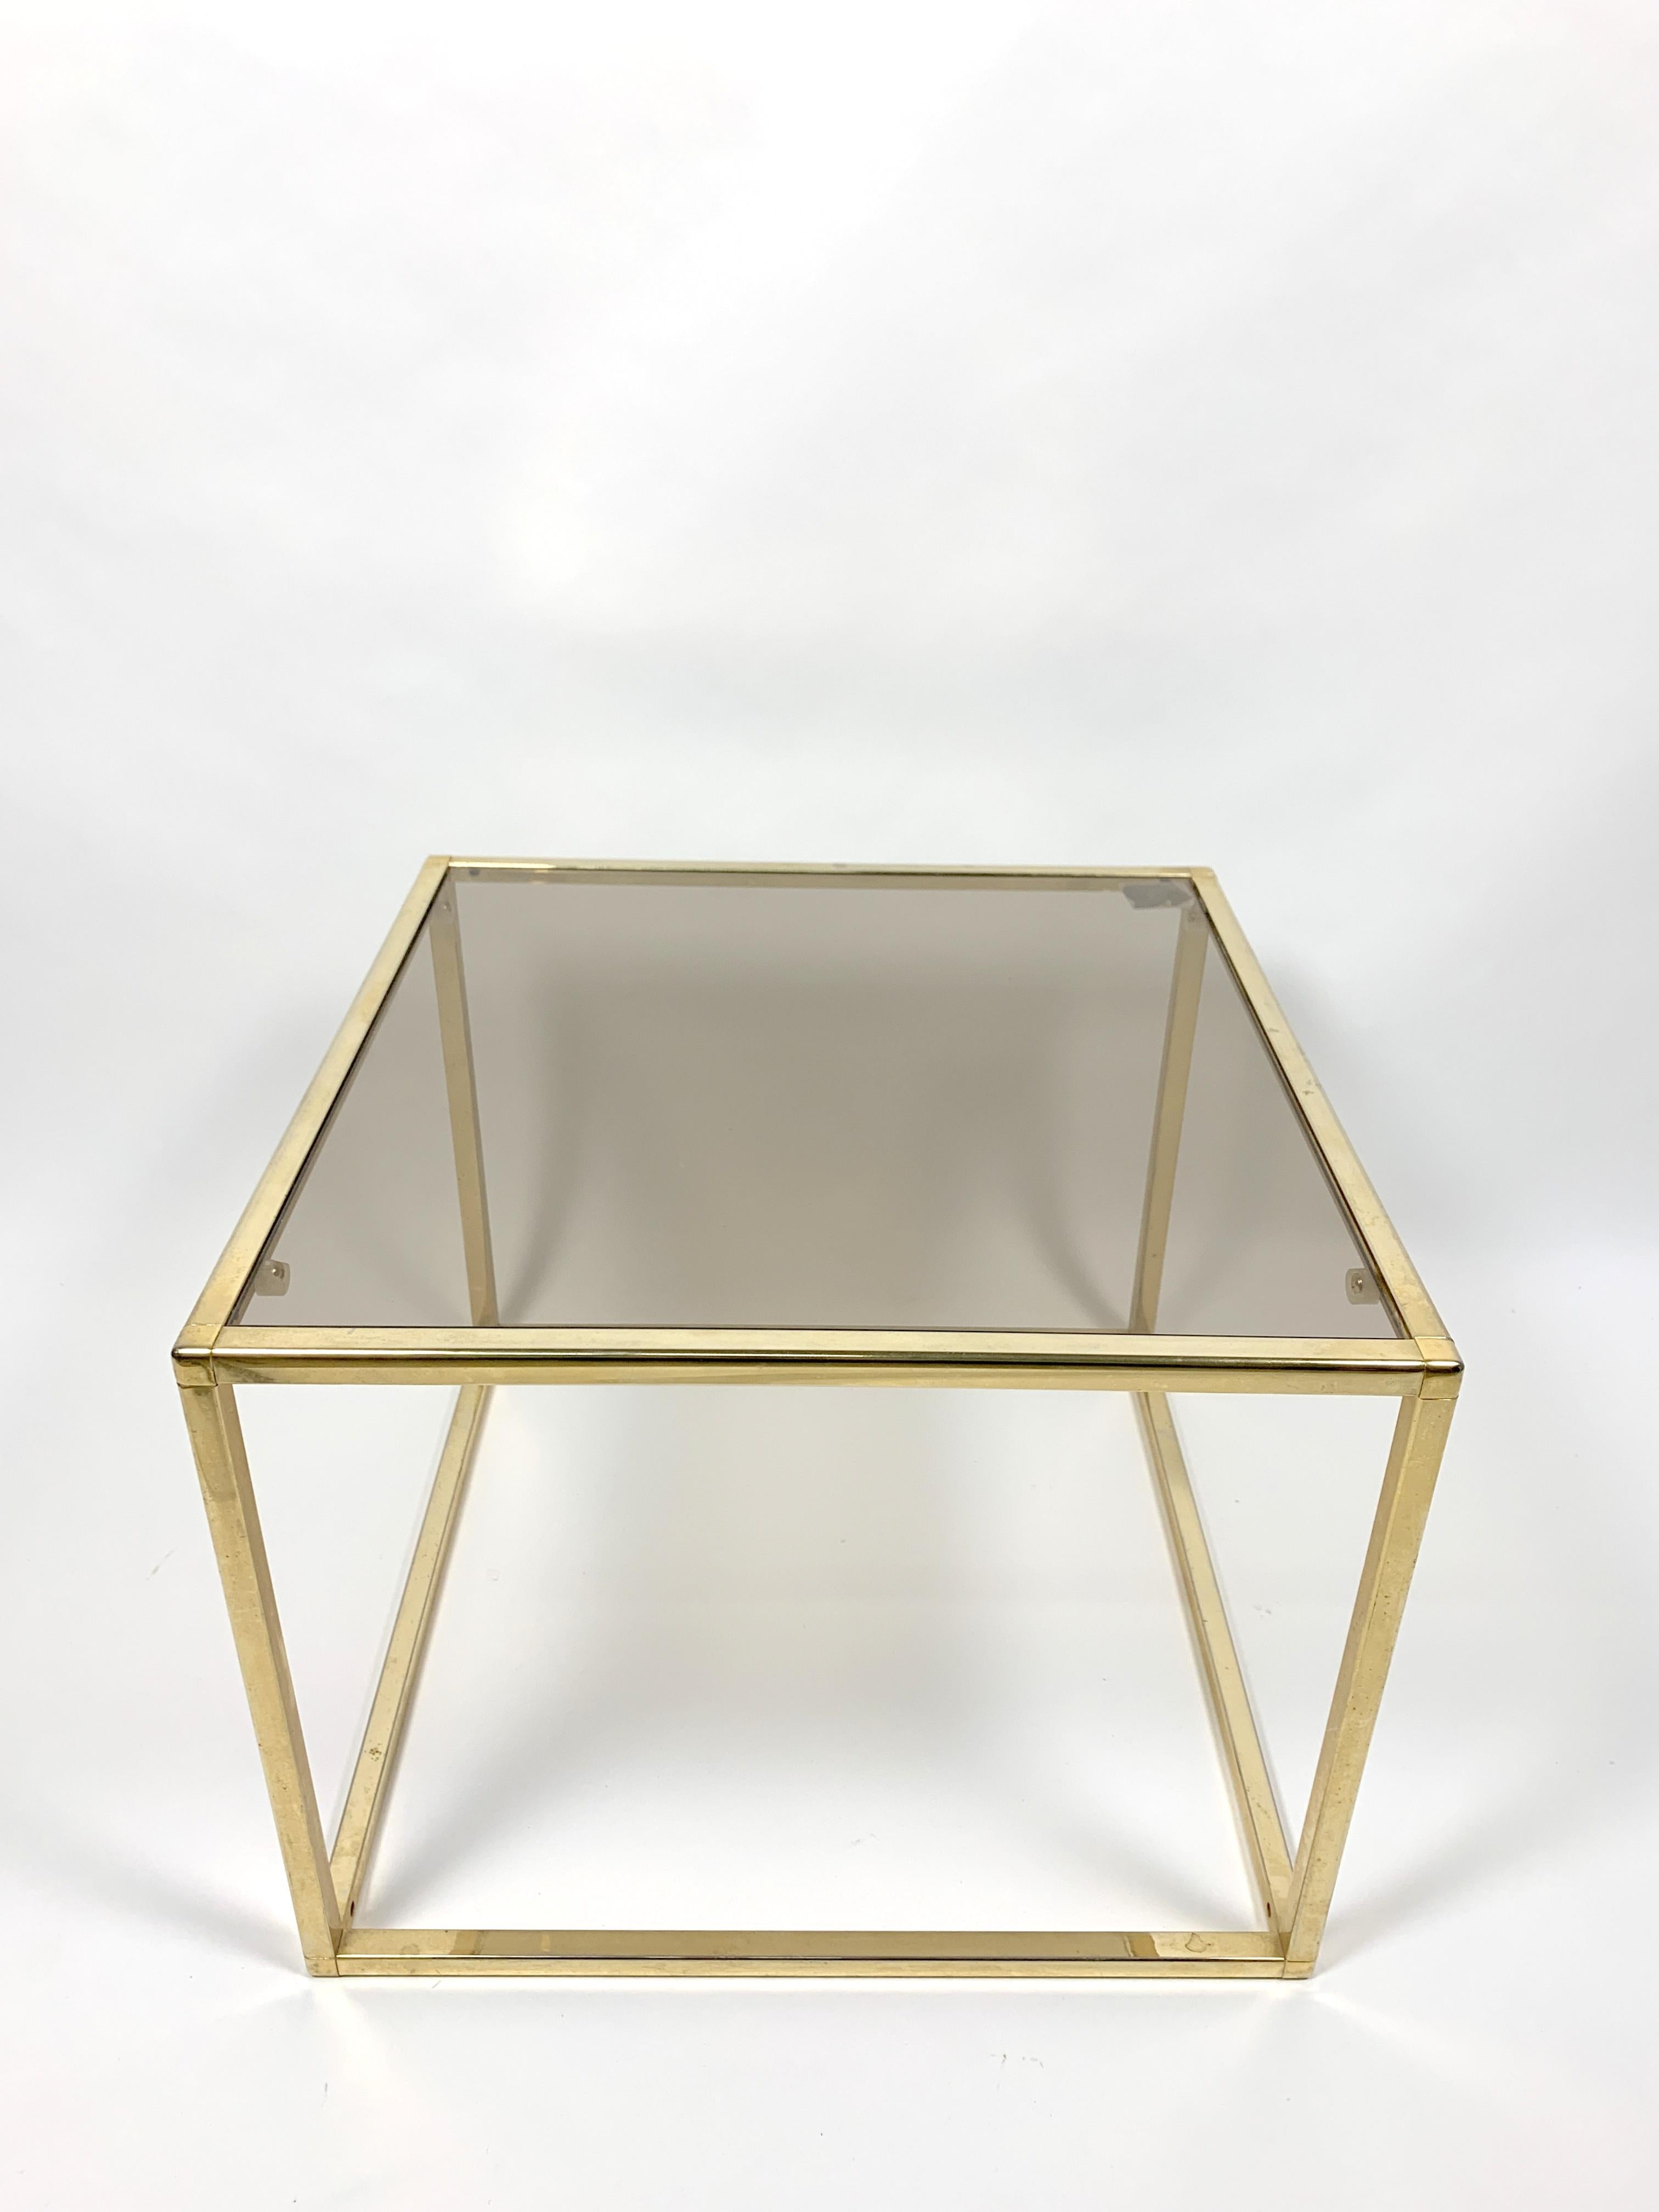 Brass-plated rectangular small table with glass top, 1970s. Great condition.